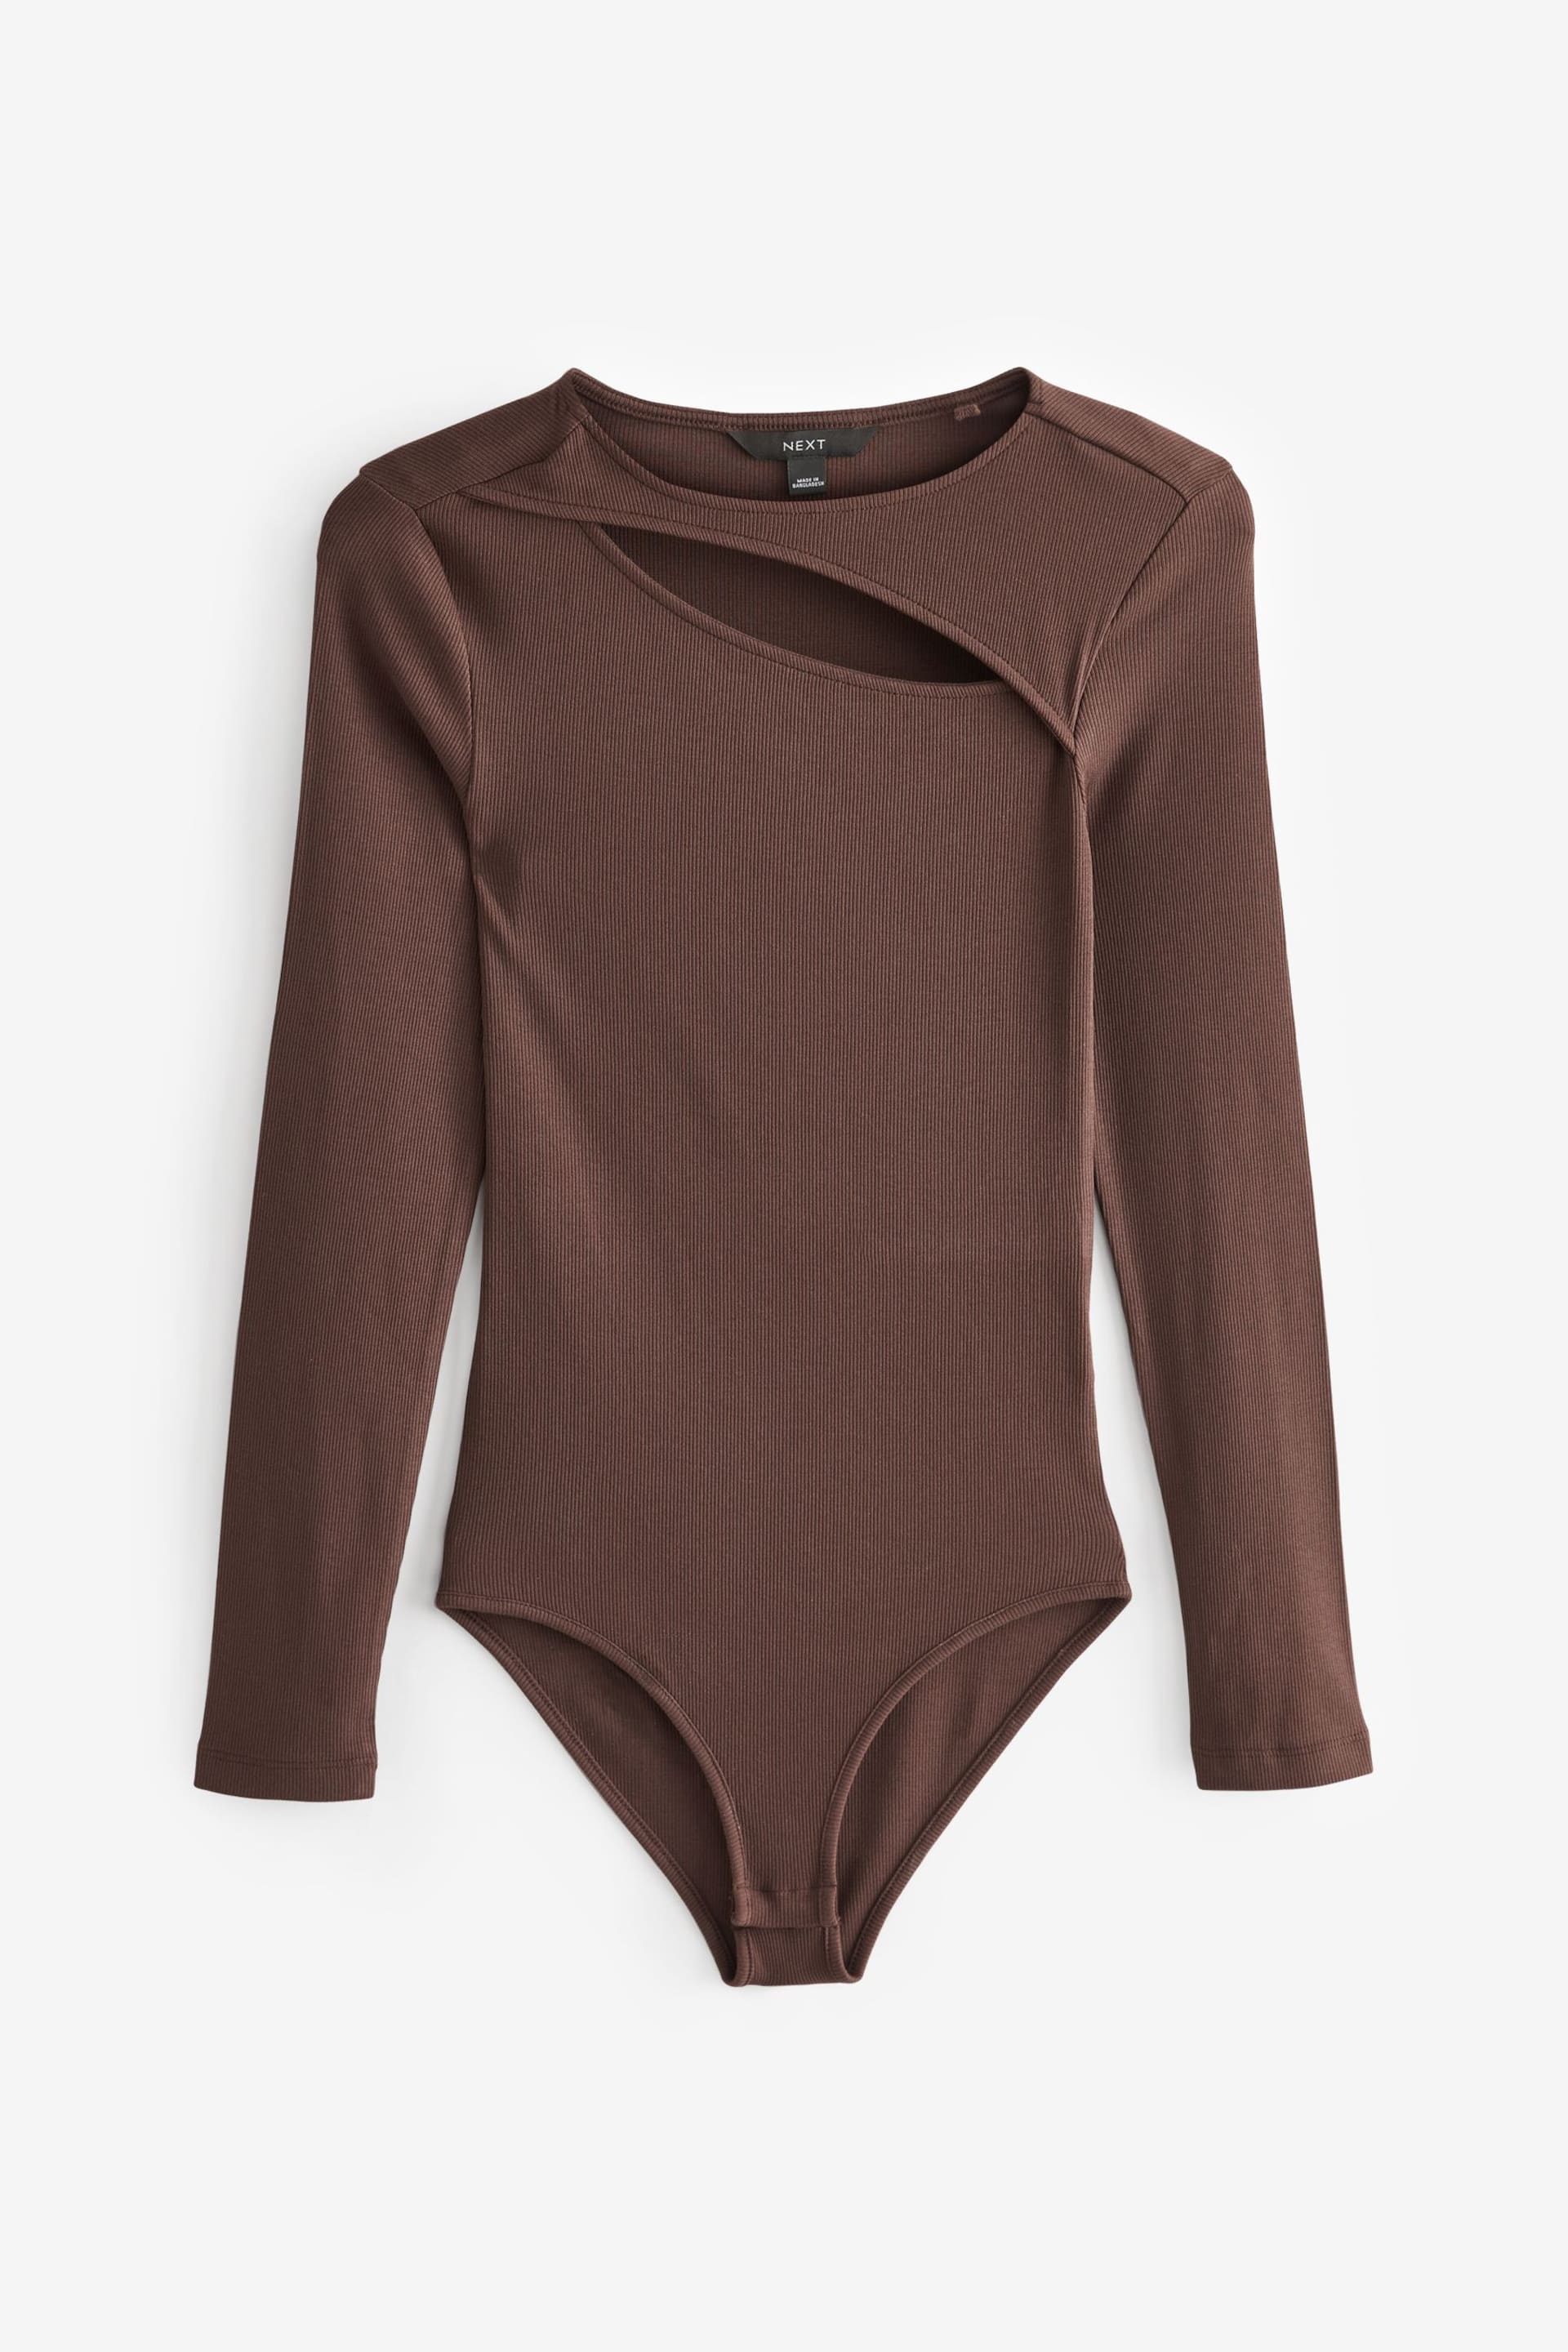 Chocolate Brown Cut-Out Bodysuit - Image 5 of 6